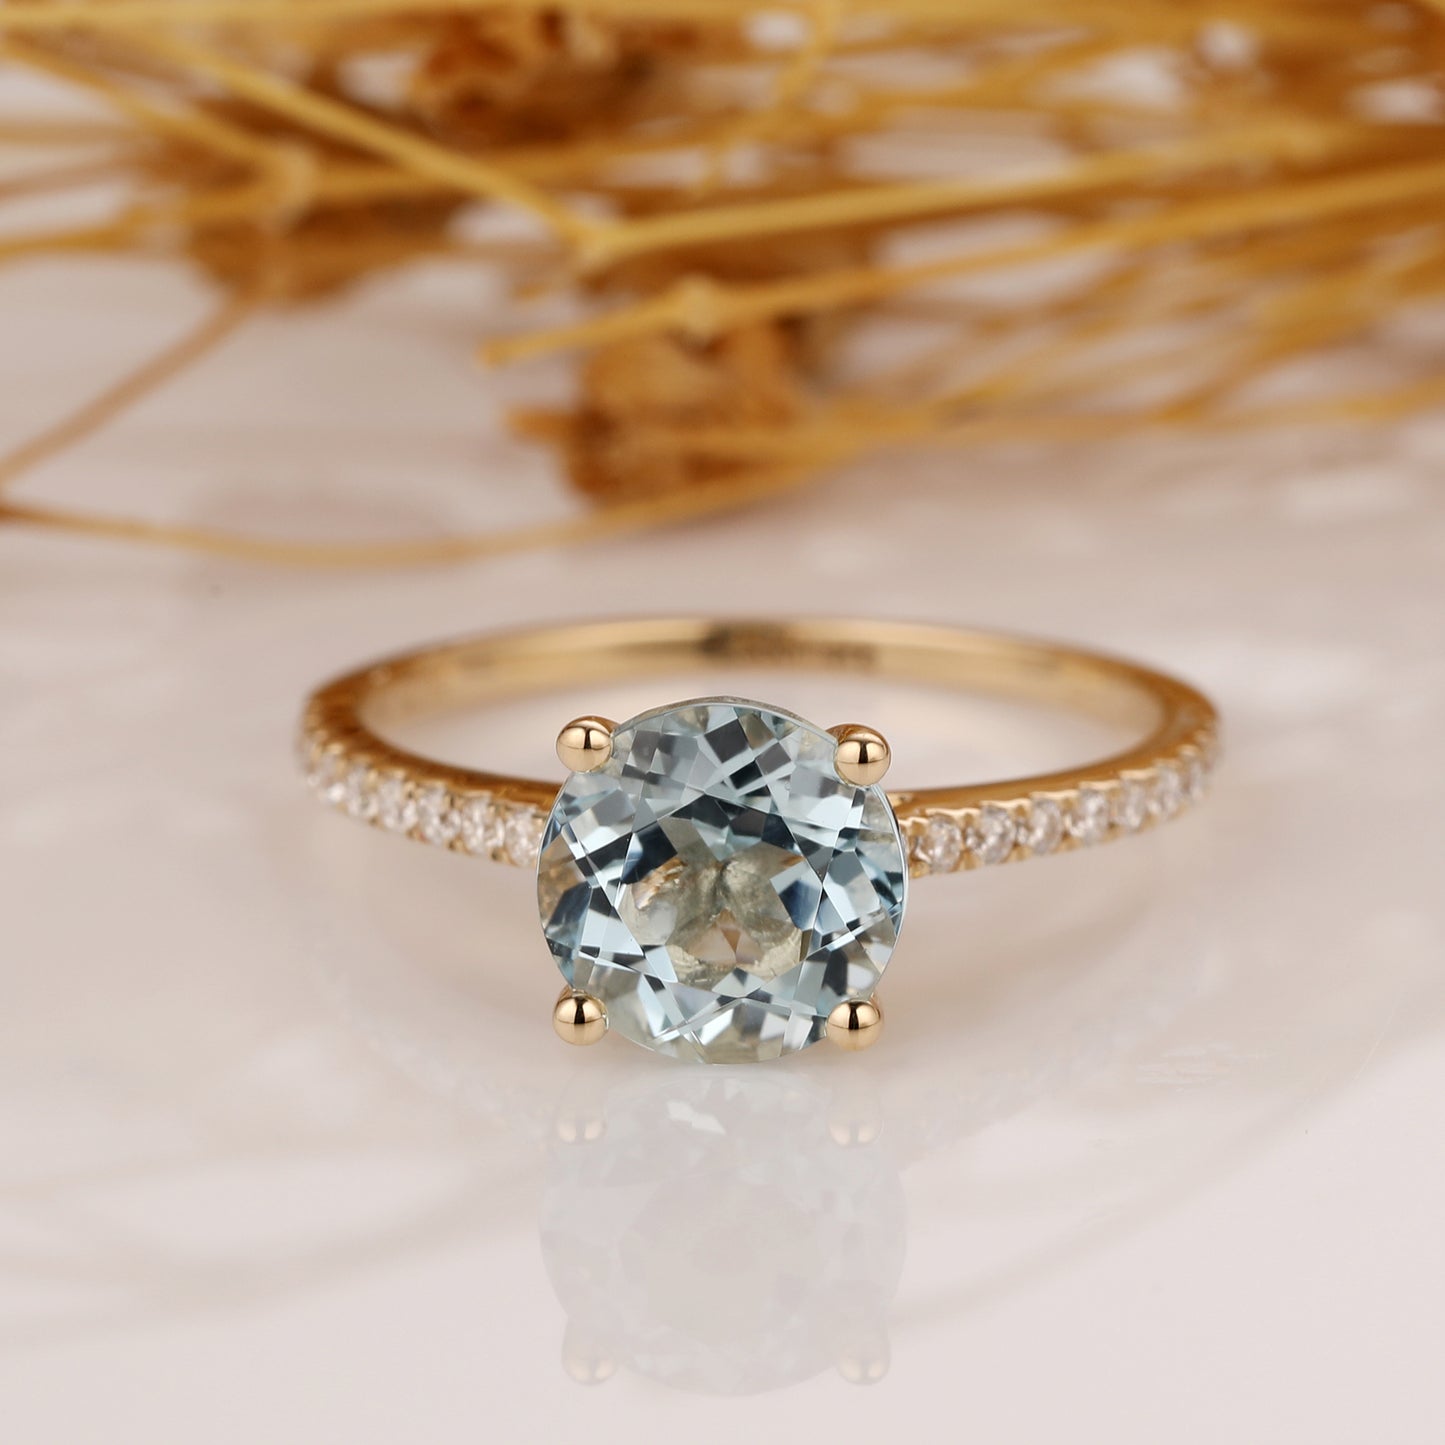 1.25CT Round Cut Aquamarine Engagement Ring, Solid Gold Ring, Promise Wedding Ring